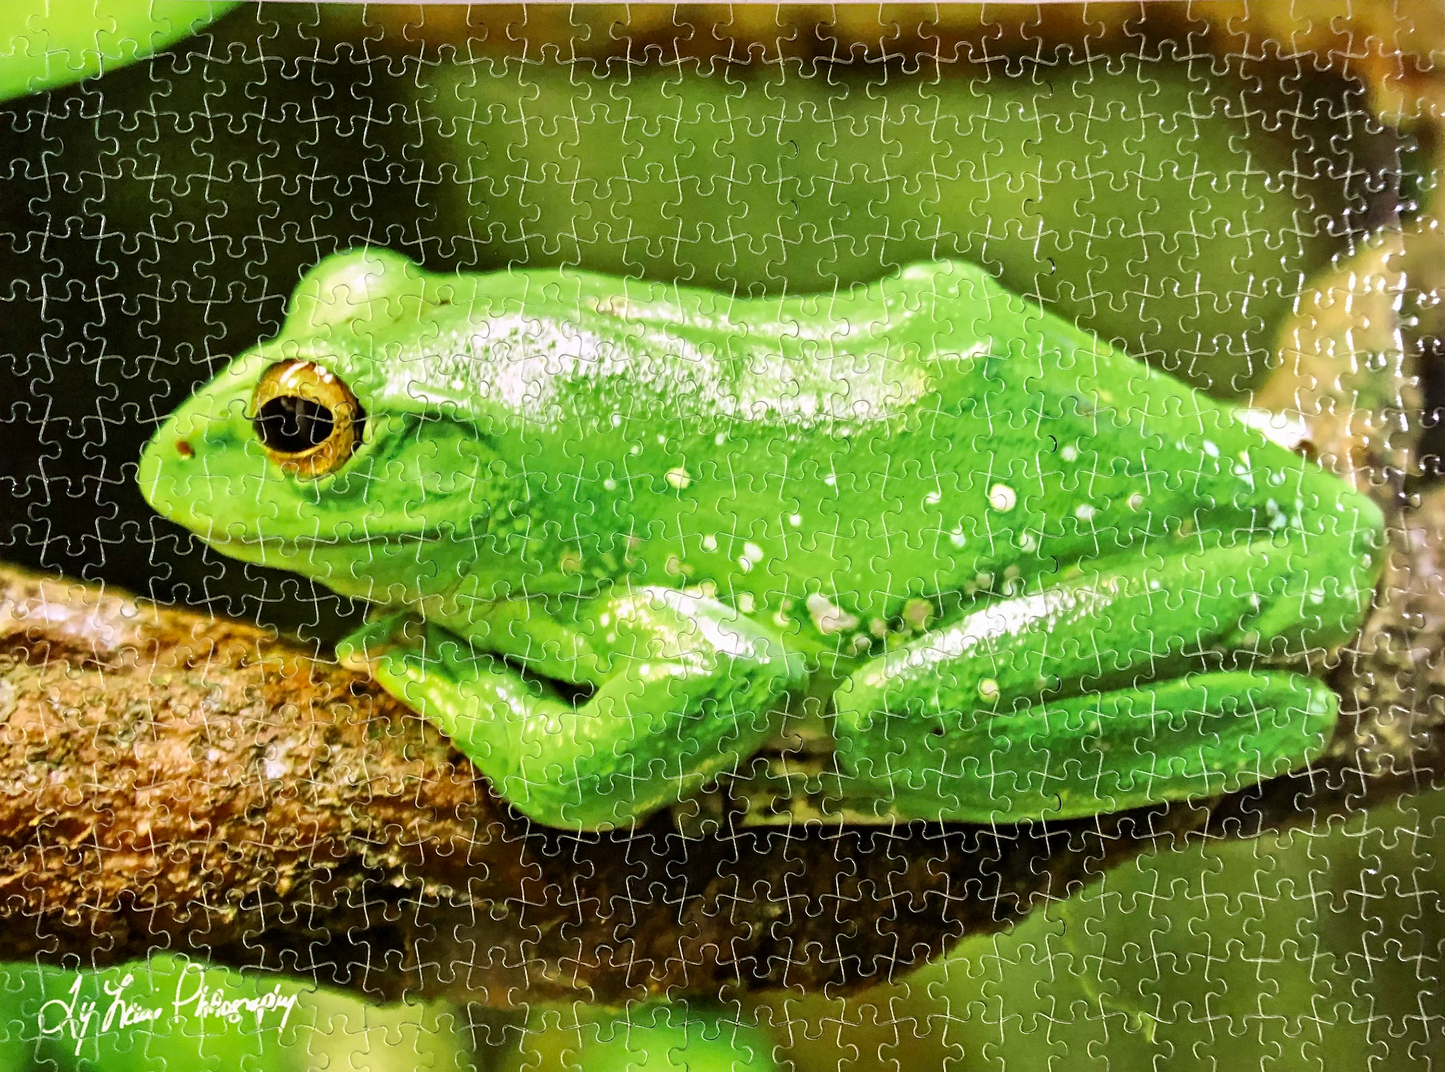 "Green Frog Sitting" by Ty Lewis